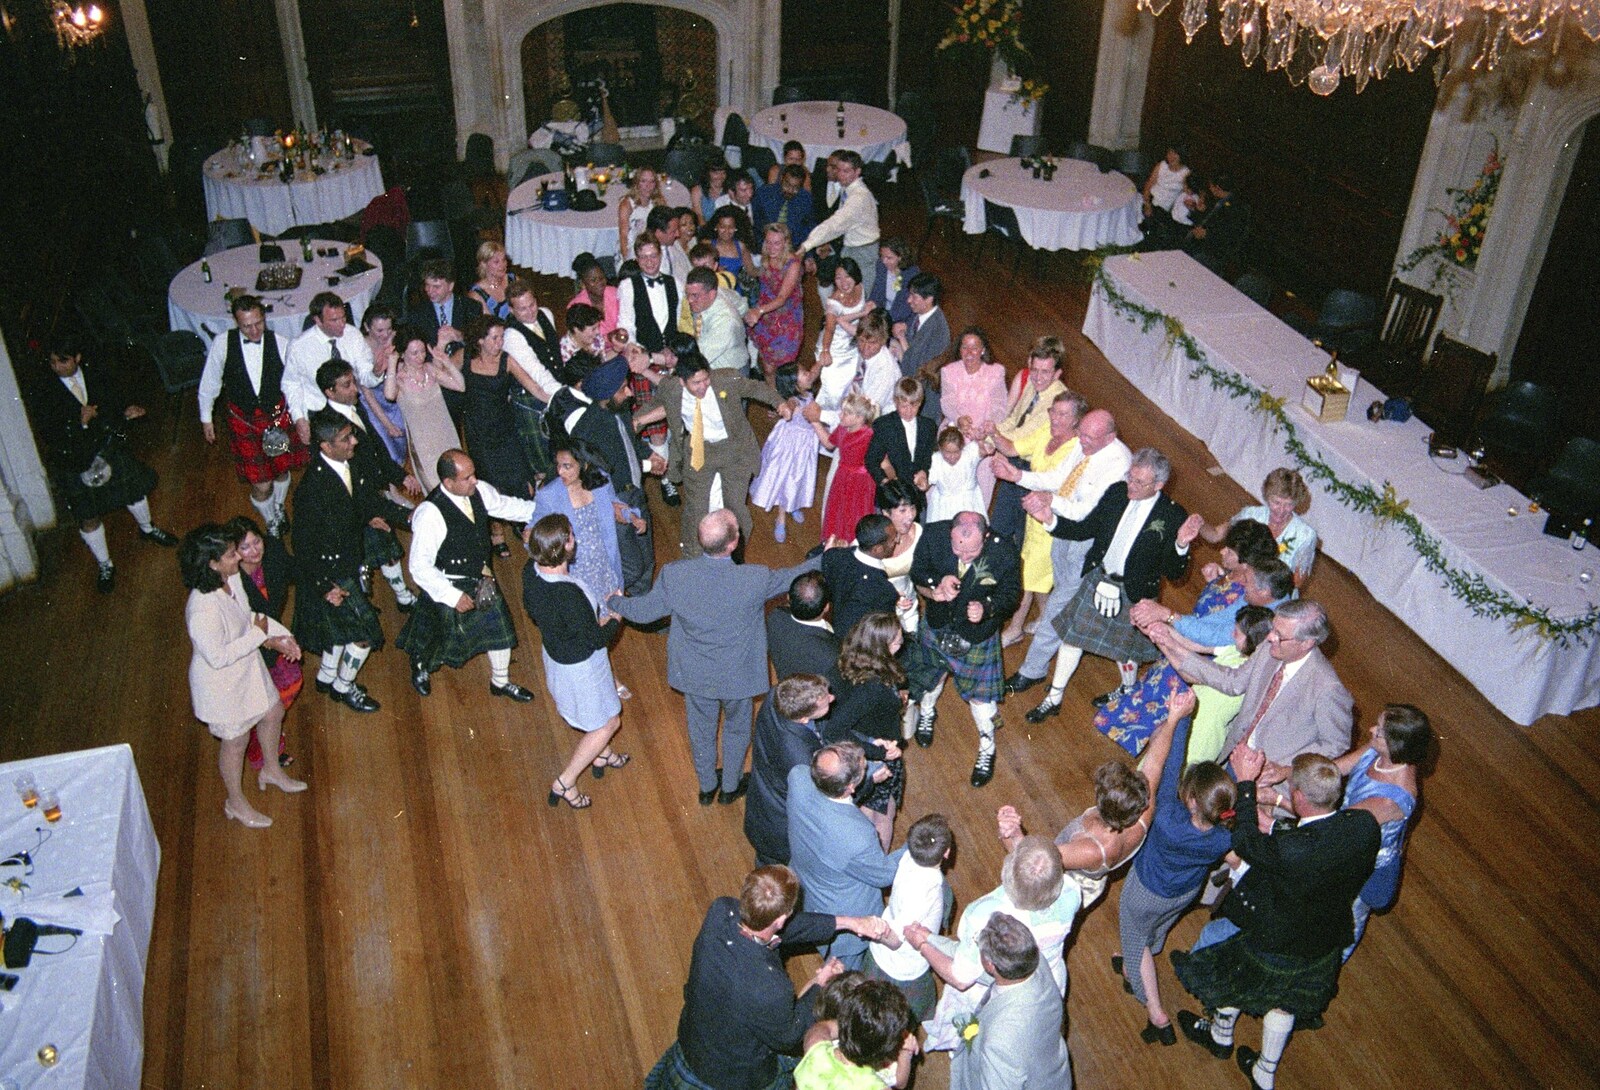 Hamish and Jane's Wedding, Canford School, Wimborne, Dorset - 5th August 1998: Dancing (from) the ceiling